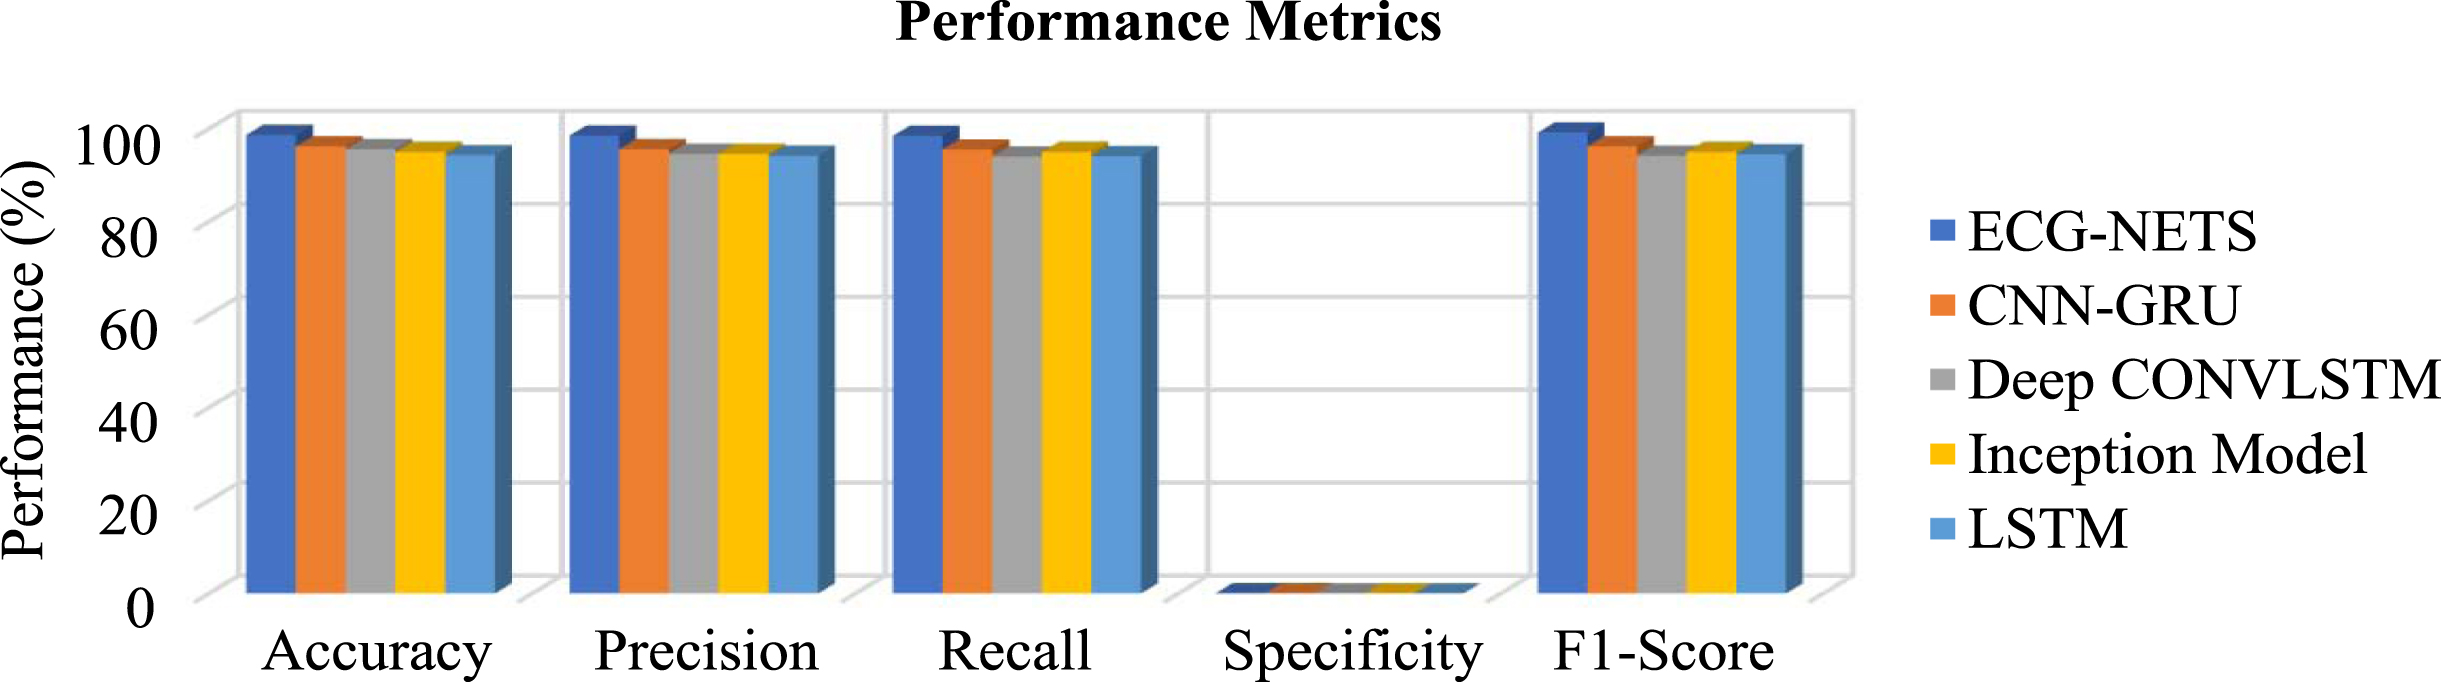 Performance metrics comparison for exiting methods in detecting ambulation activities (real time datasets).